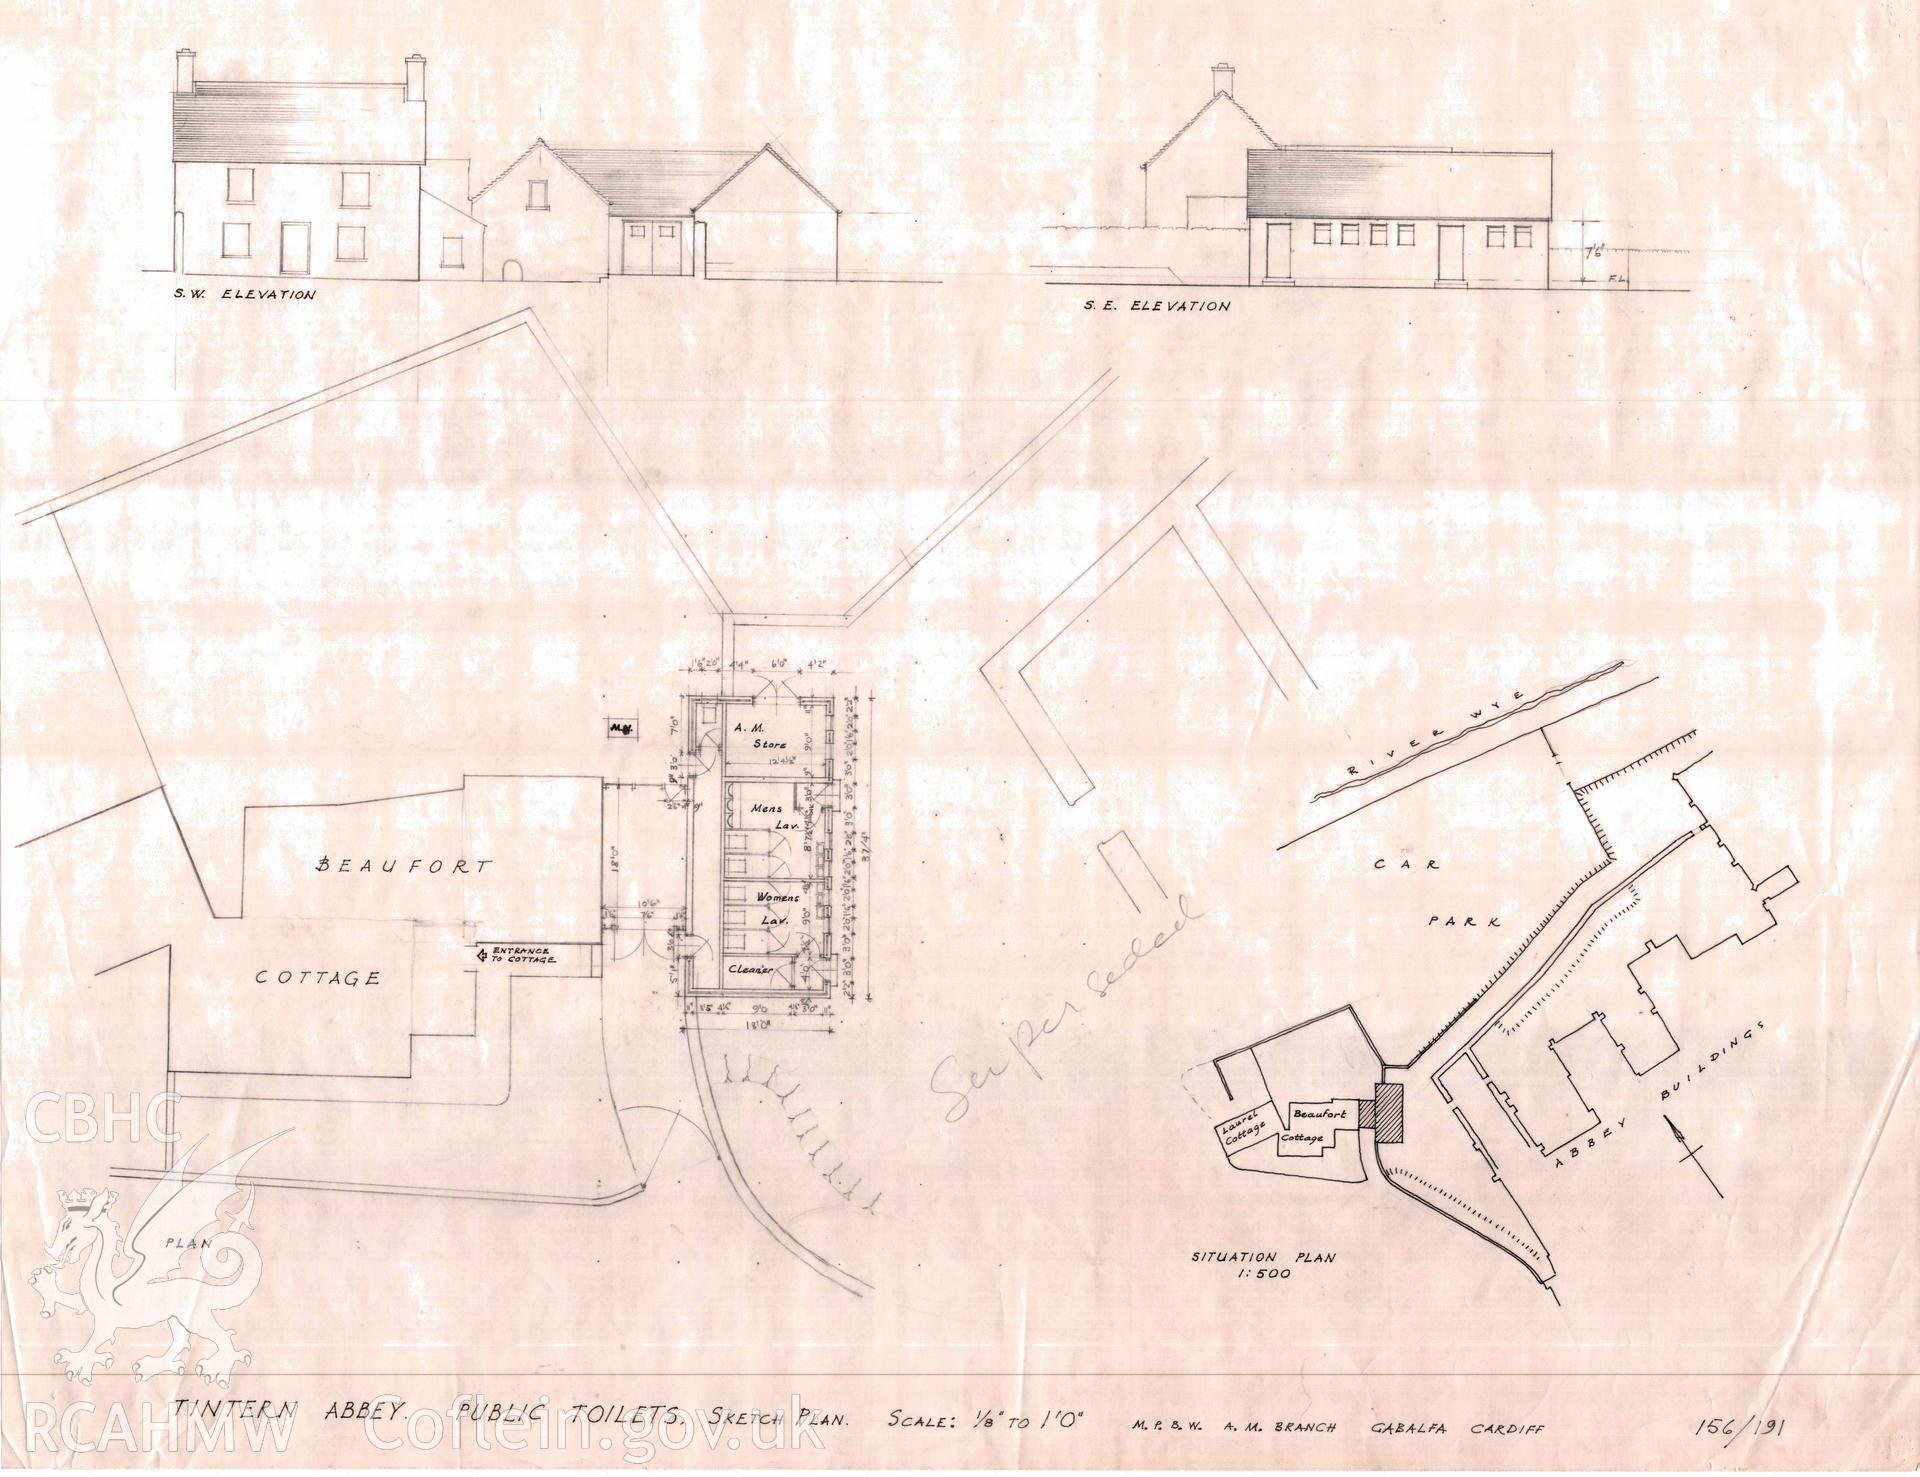 Cadw guardianship monument drawing, location plan of proposed toilets, Tintern Abbey.  Dated January 1970.